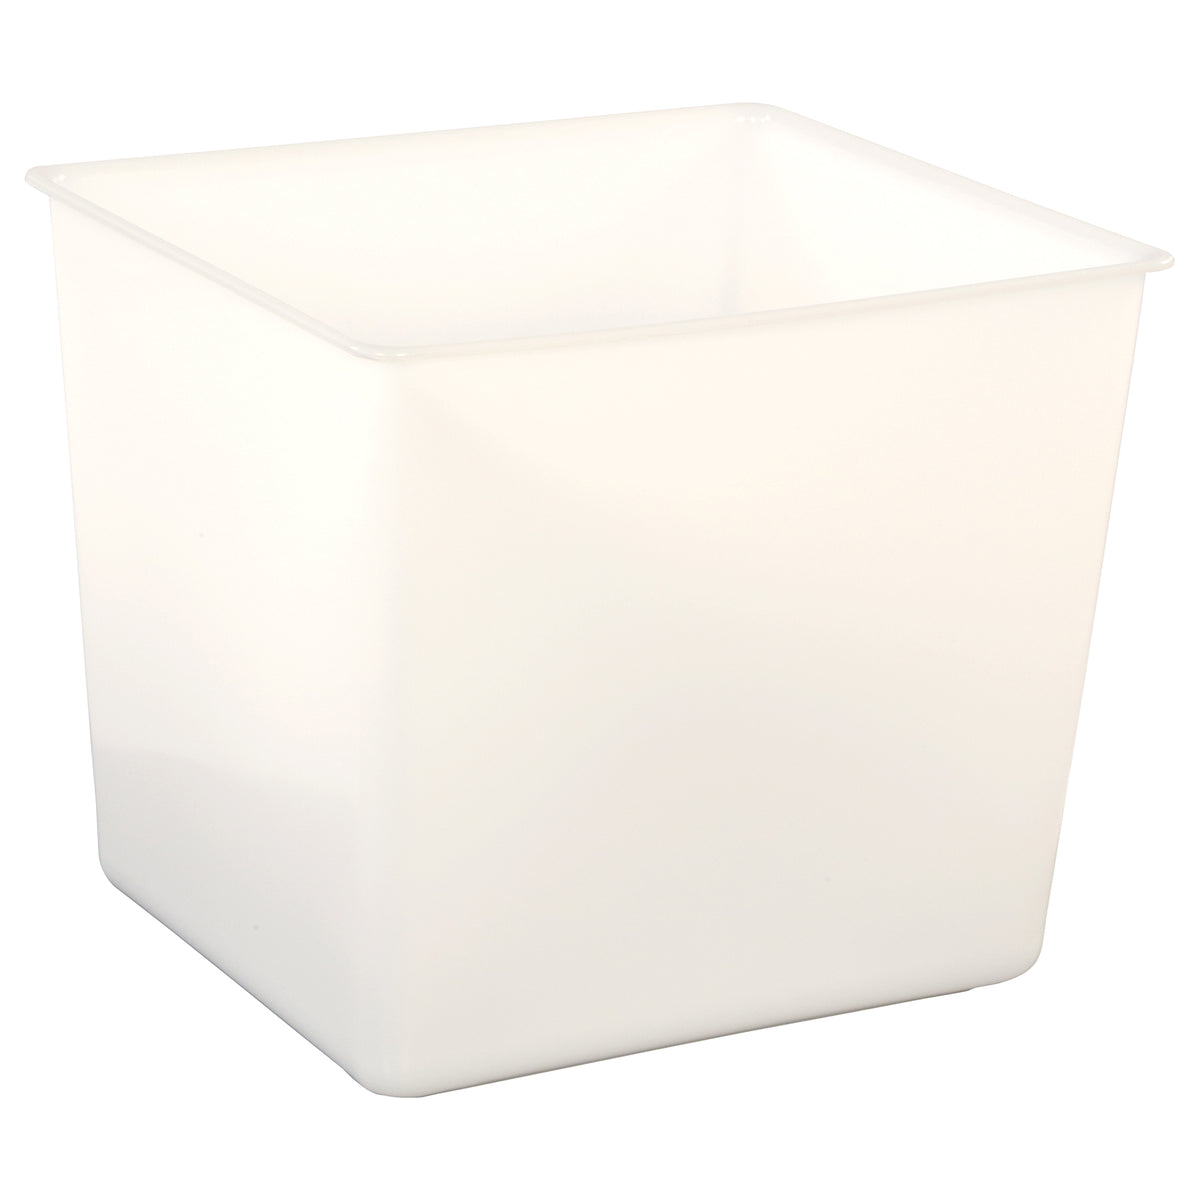 Large Opaque Organizational Bins For Childcare Storage.